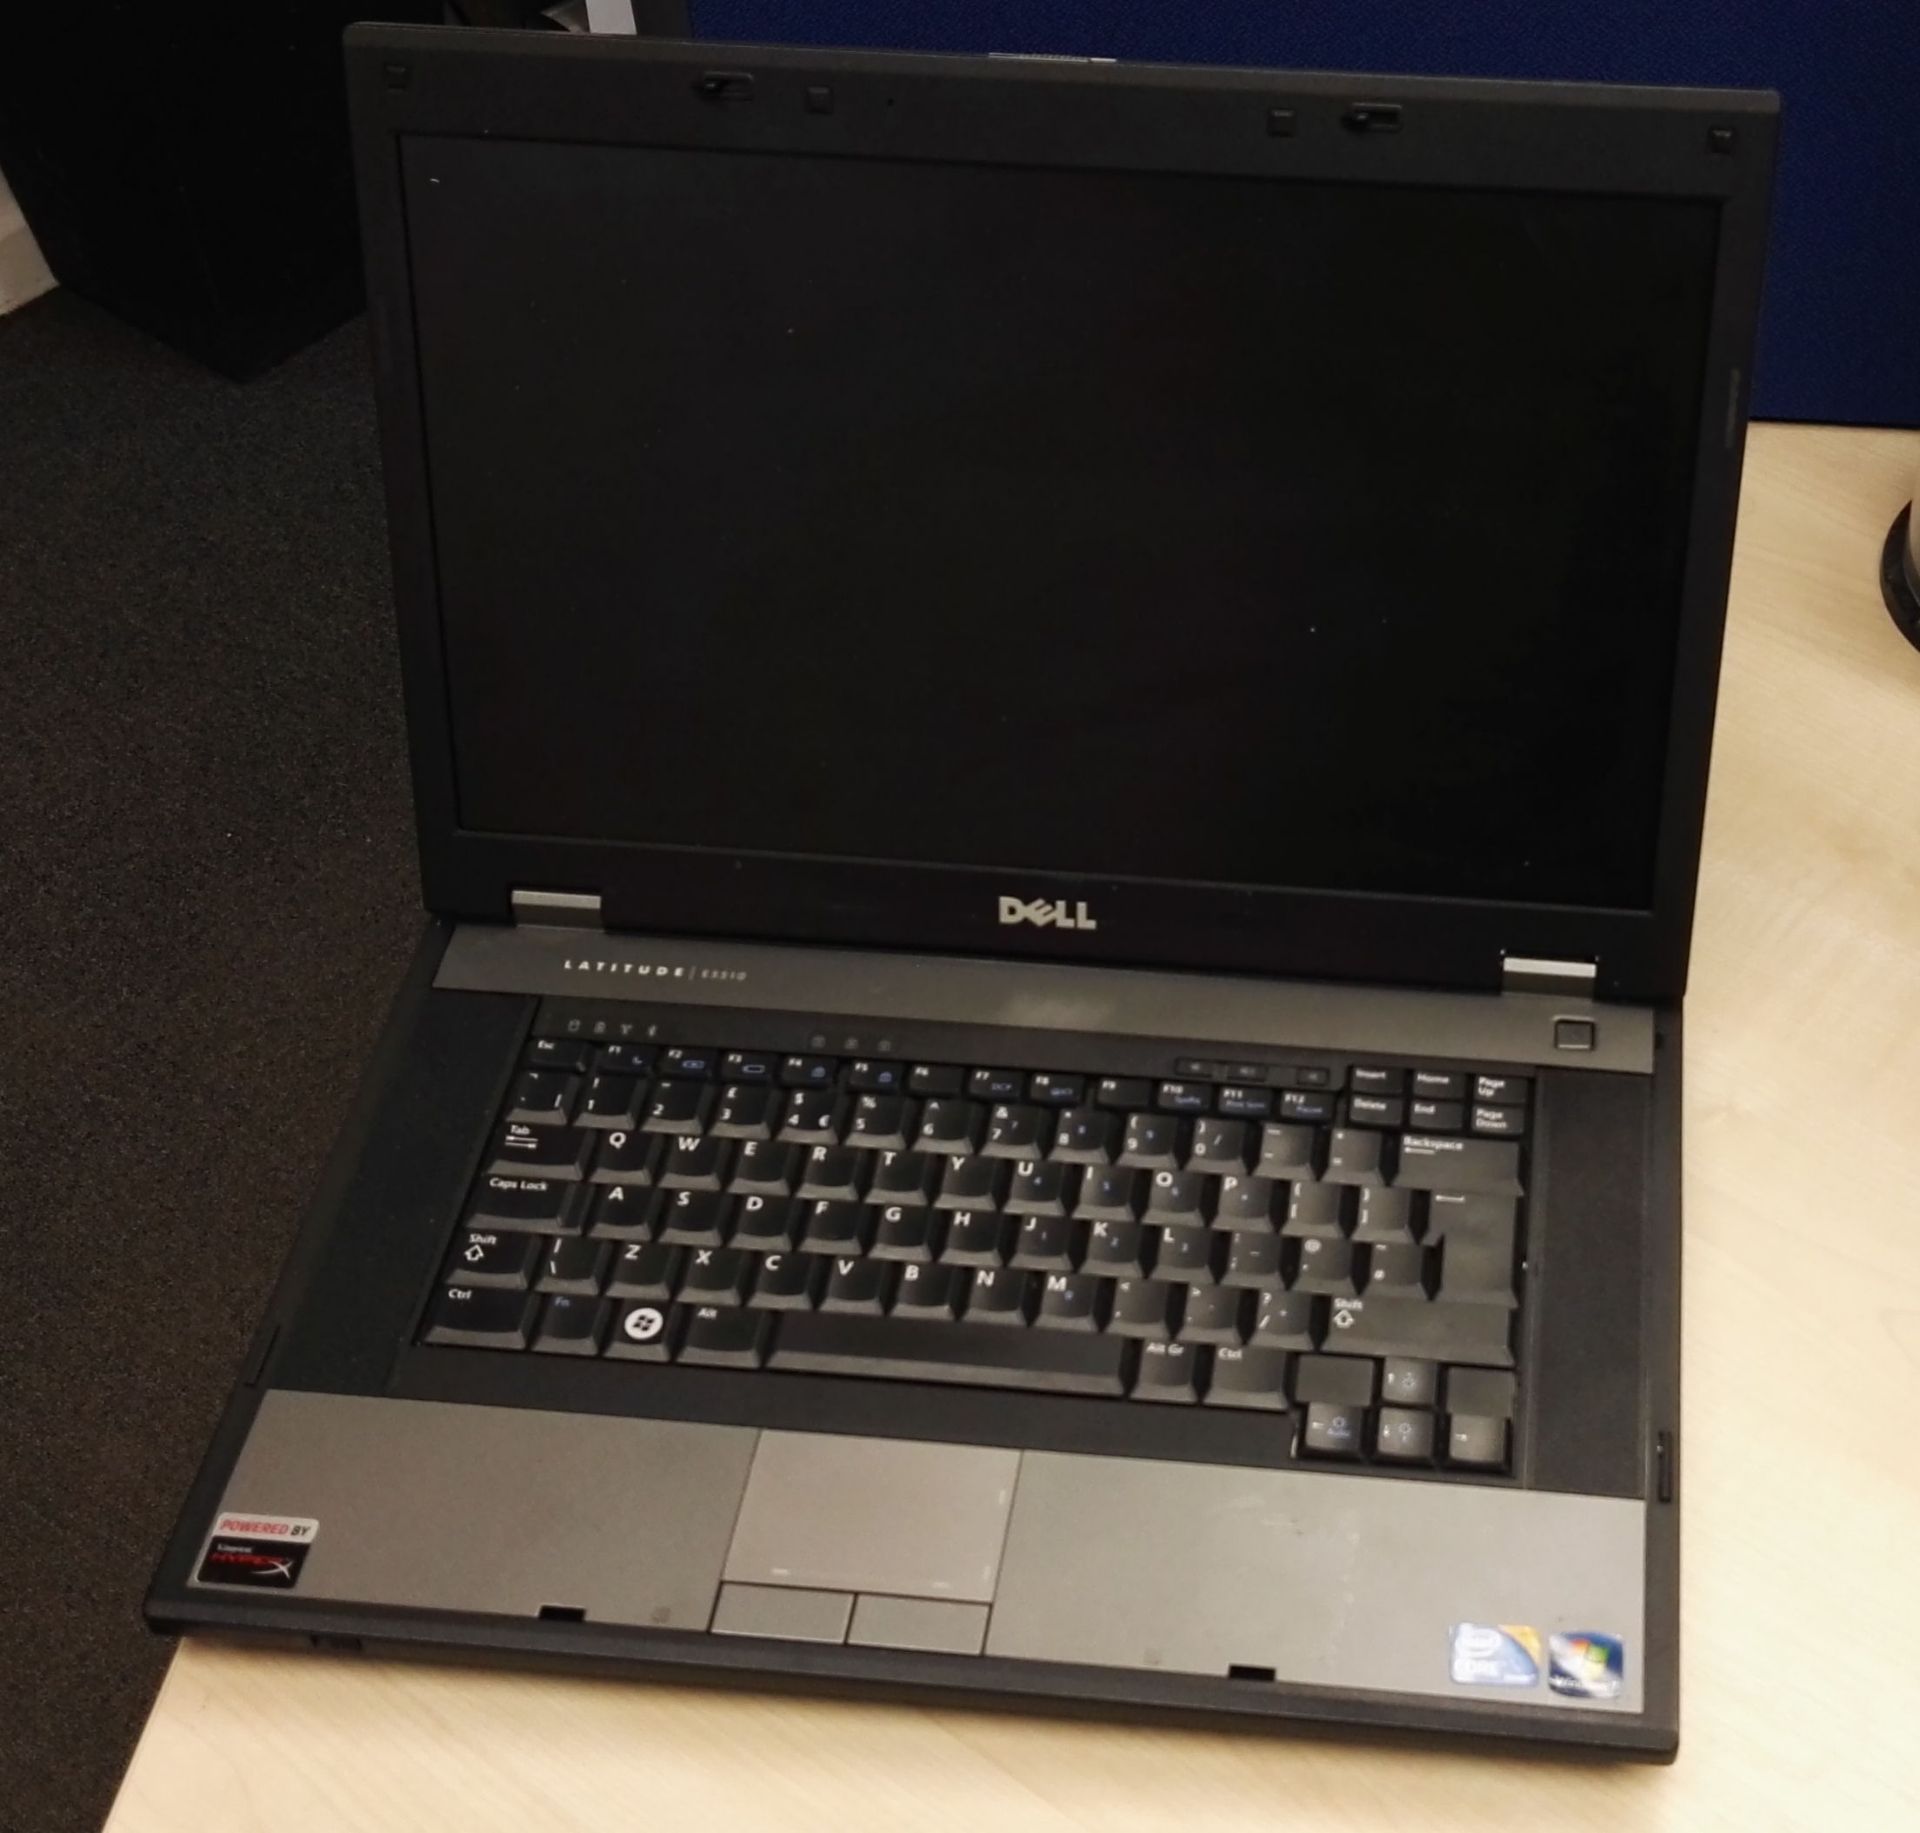 1 x Dell E5510 Latitude Laptop Computer - Features 6gb RAM, 320gb Hard Drive, Intel i5 2.4GHz - Image 9 of 16